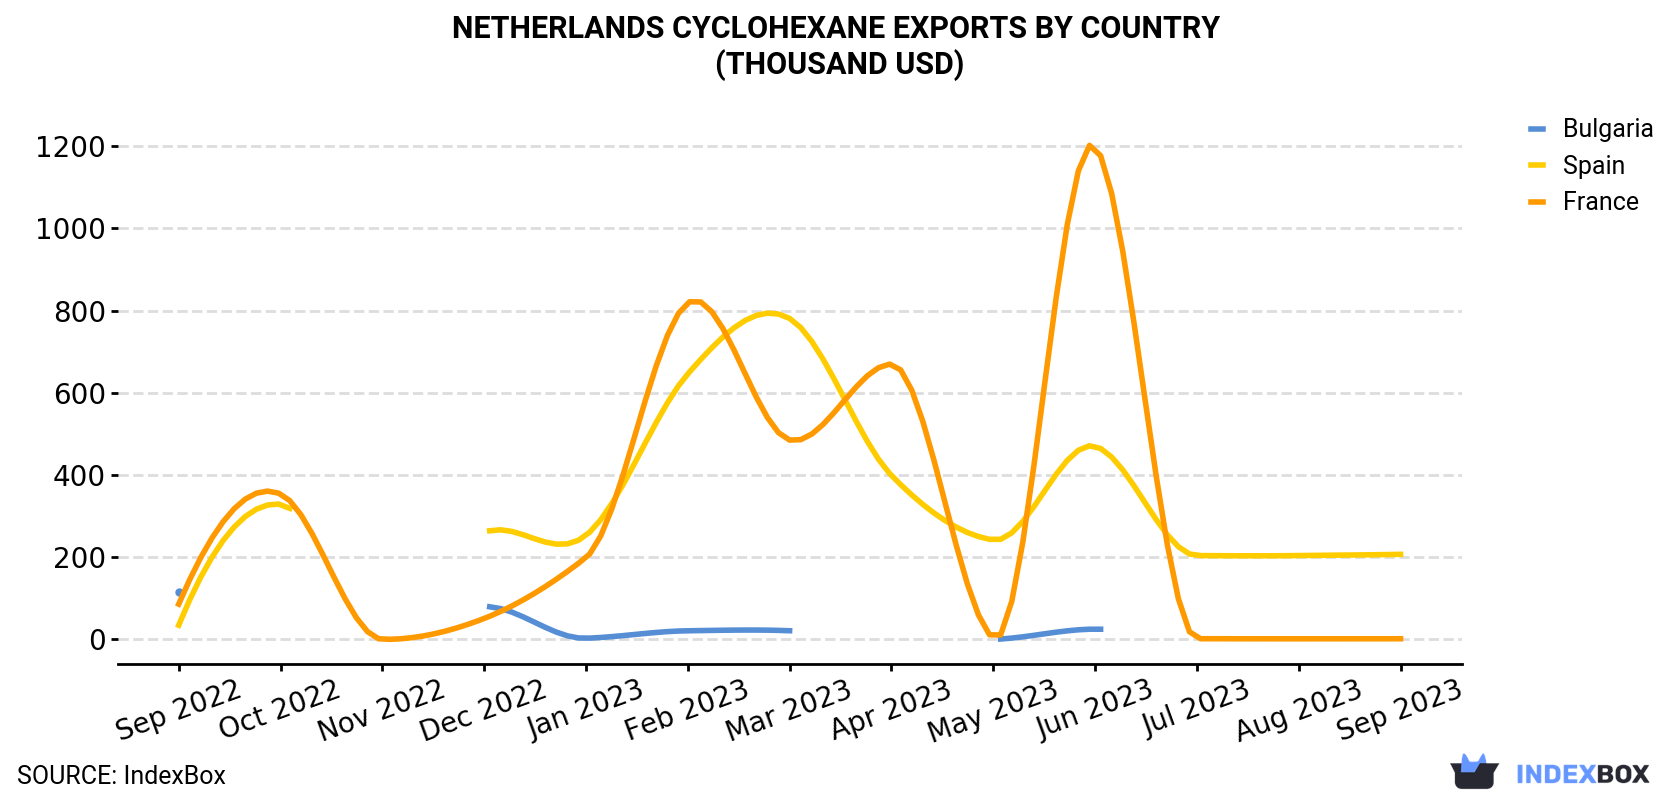 Netherlands Cyclohexane Exports By Country (Thousand USD)